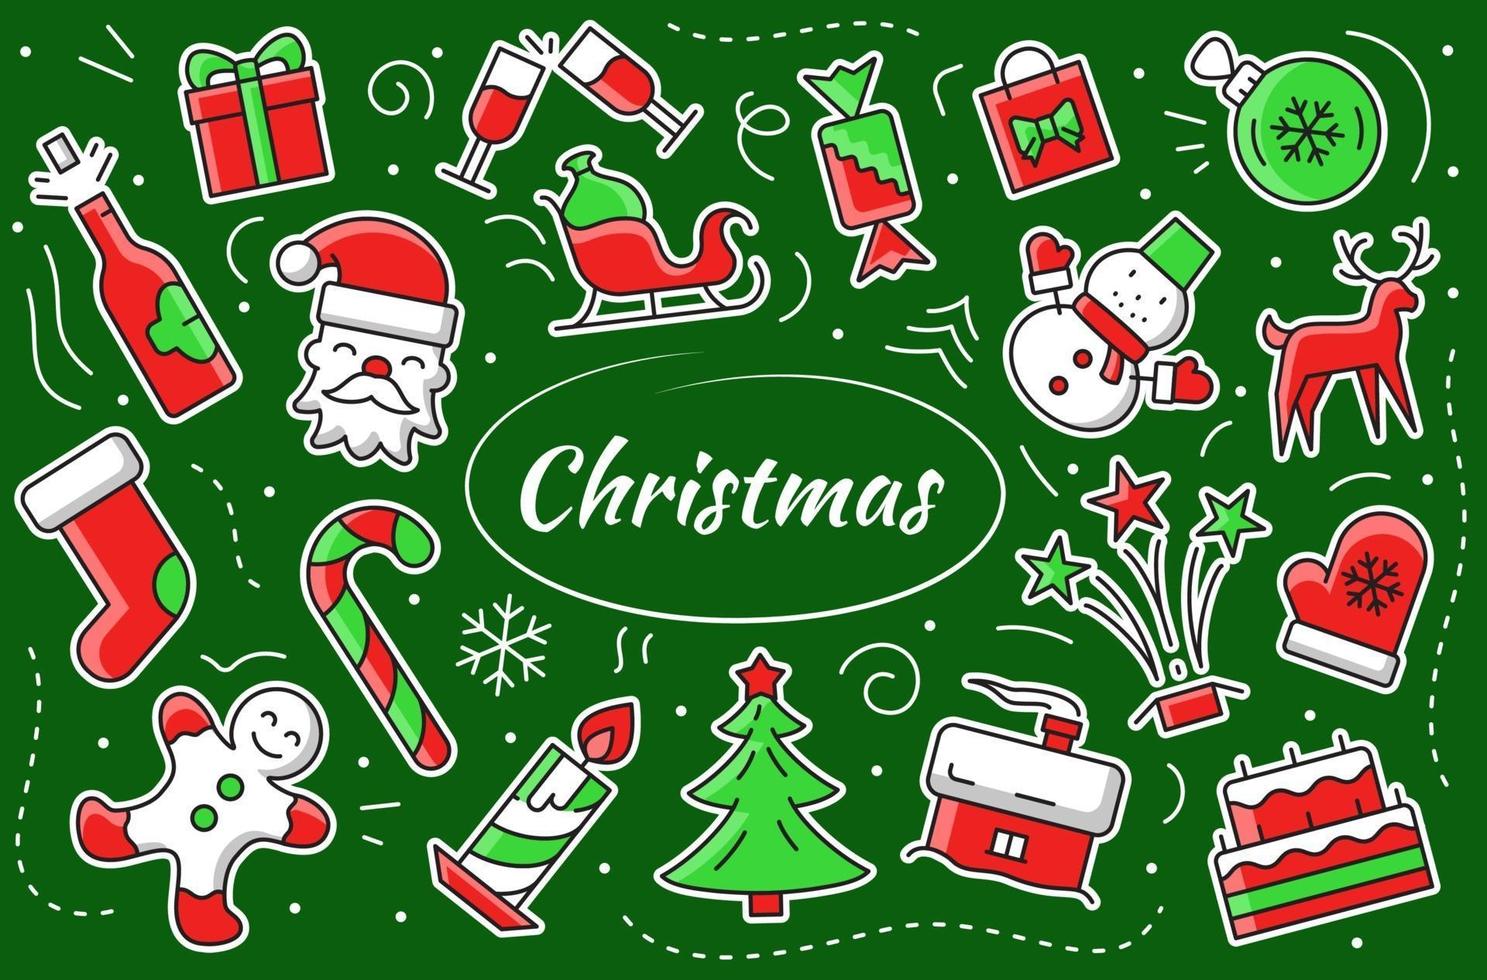 Christmas sticker set. New Year vector elements and objects.